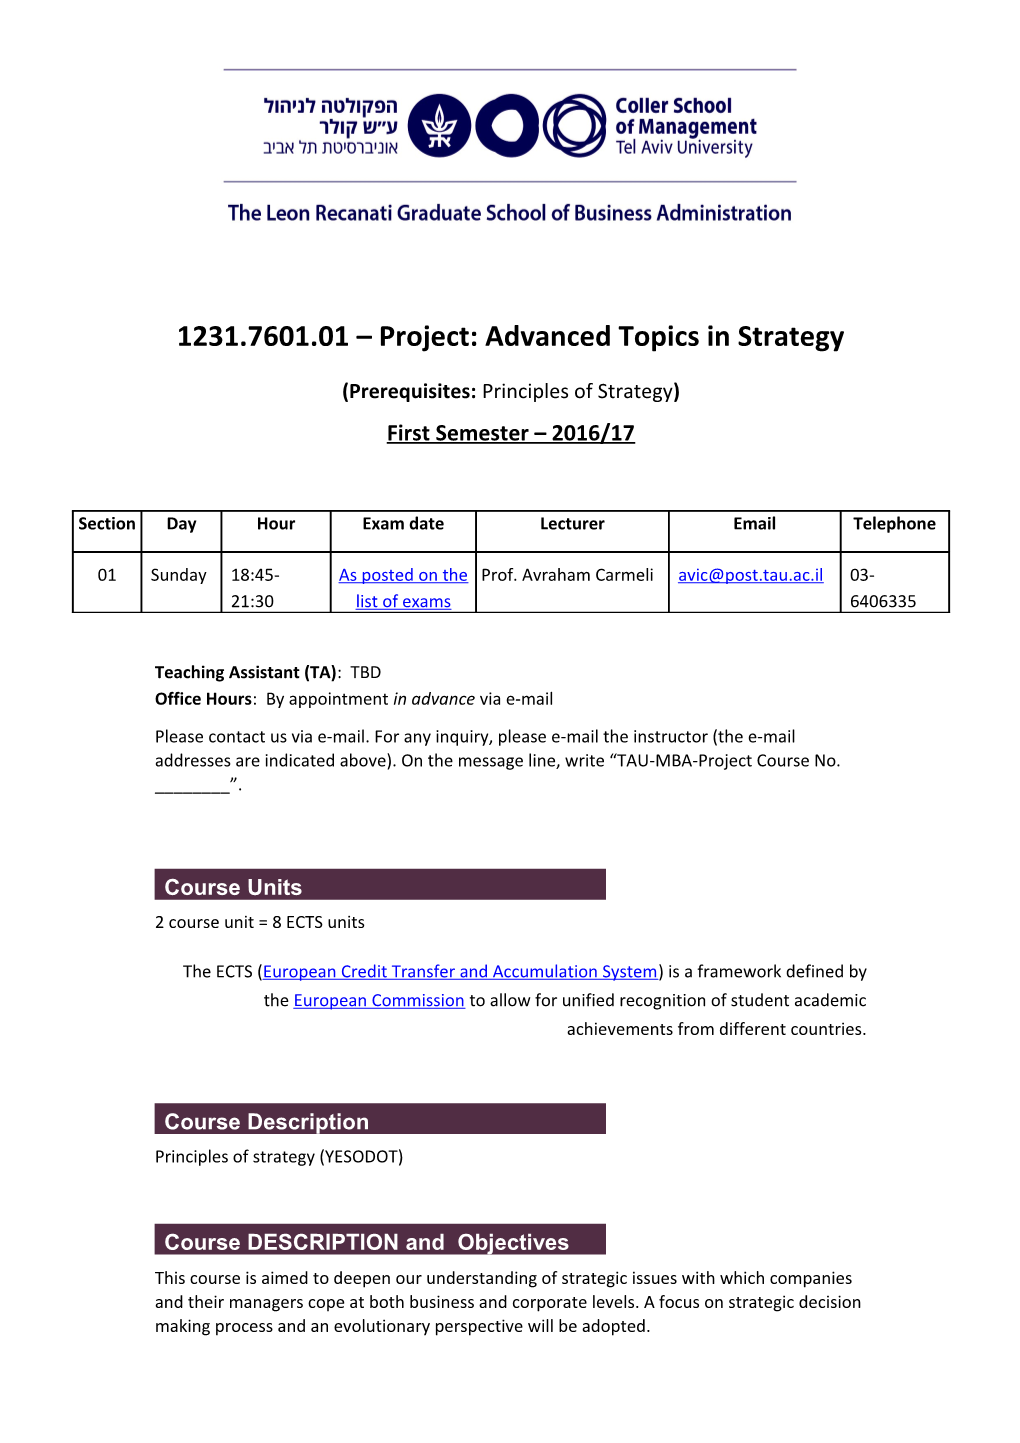 1231.7601.01 Project: Advanced Topics in Strategy